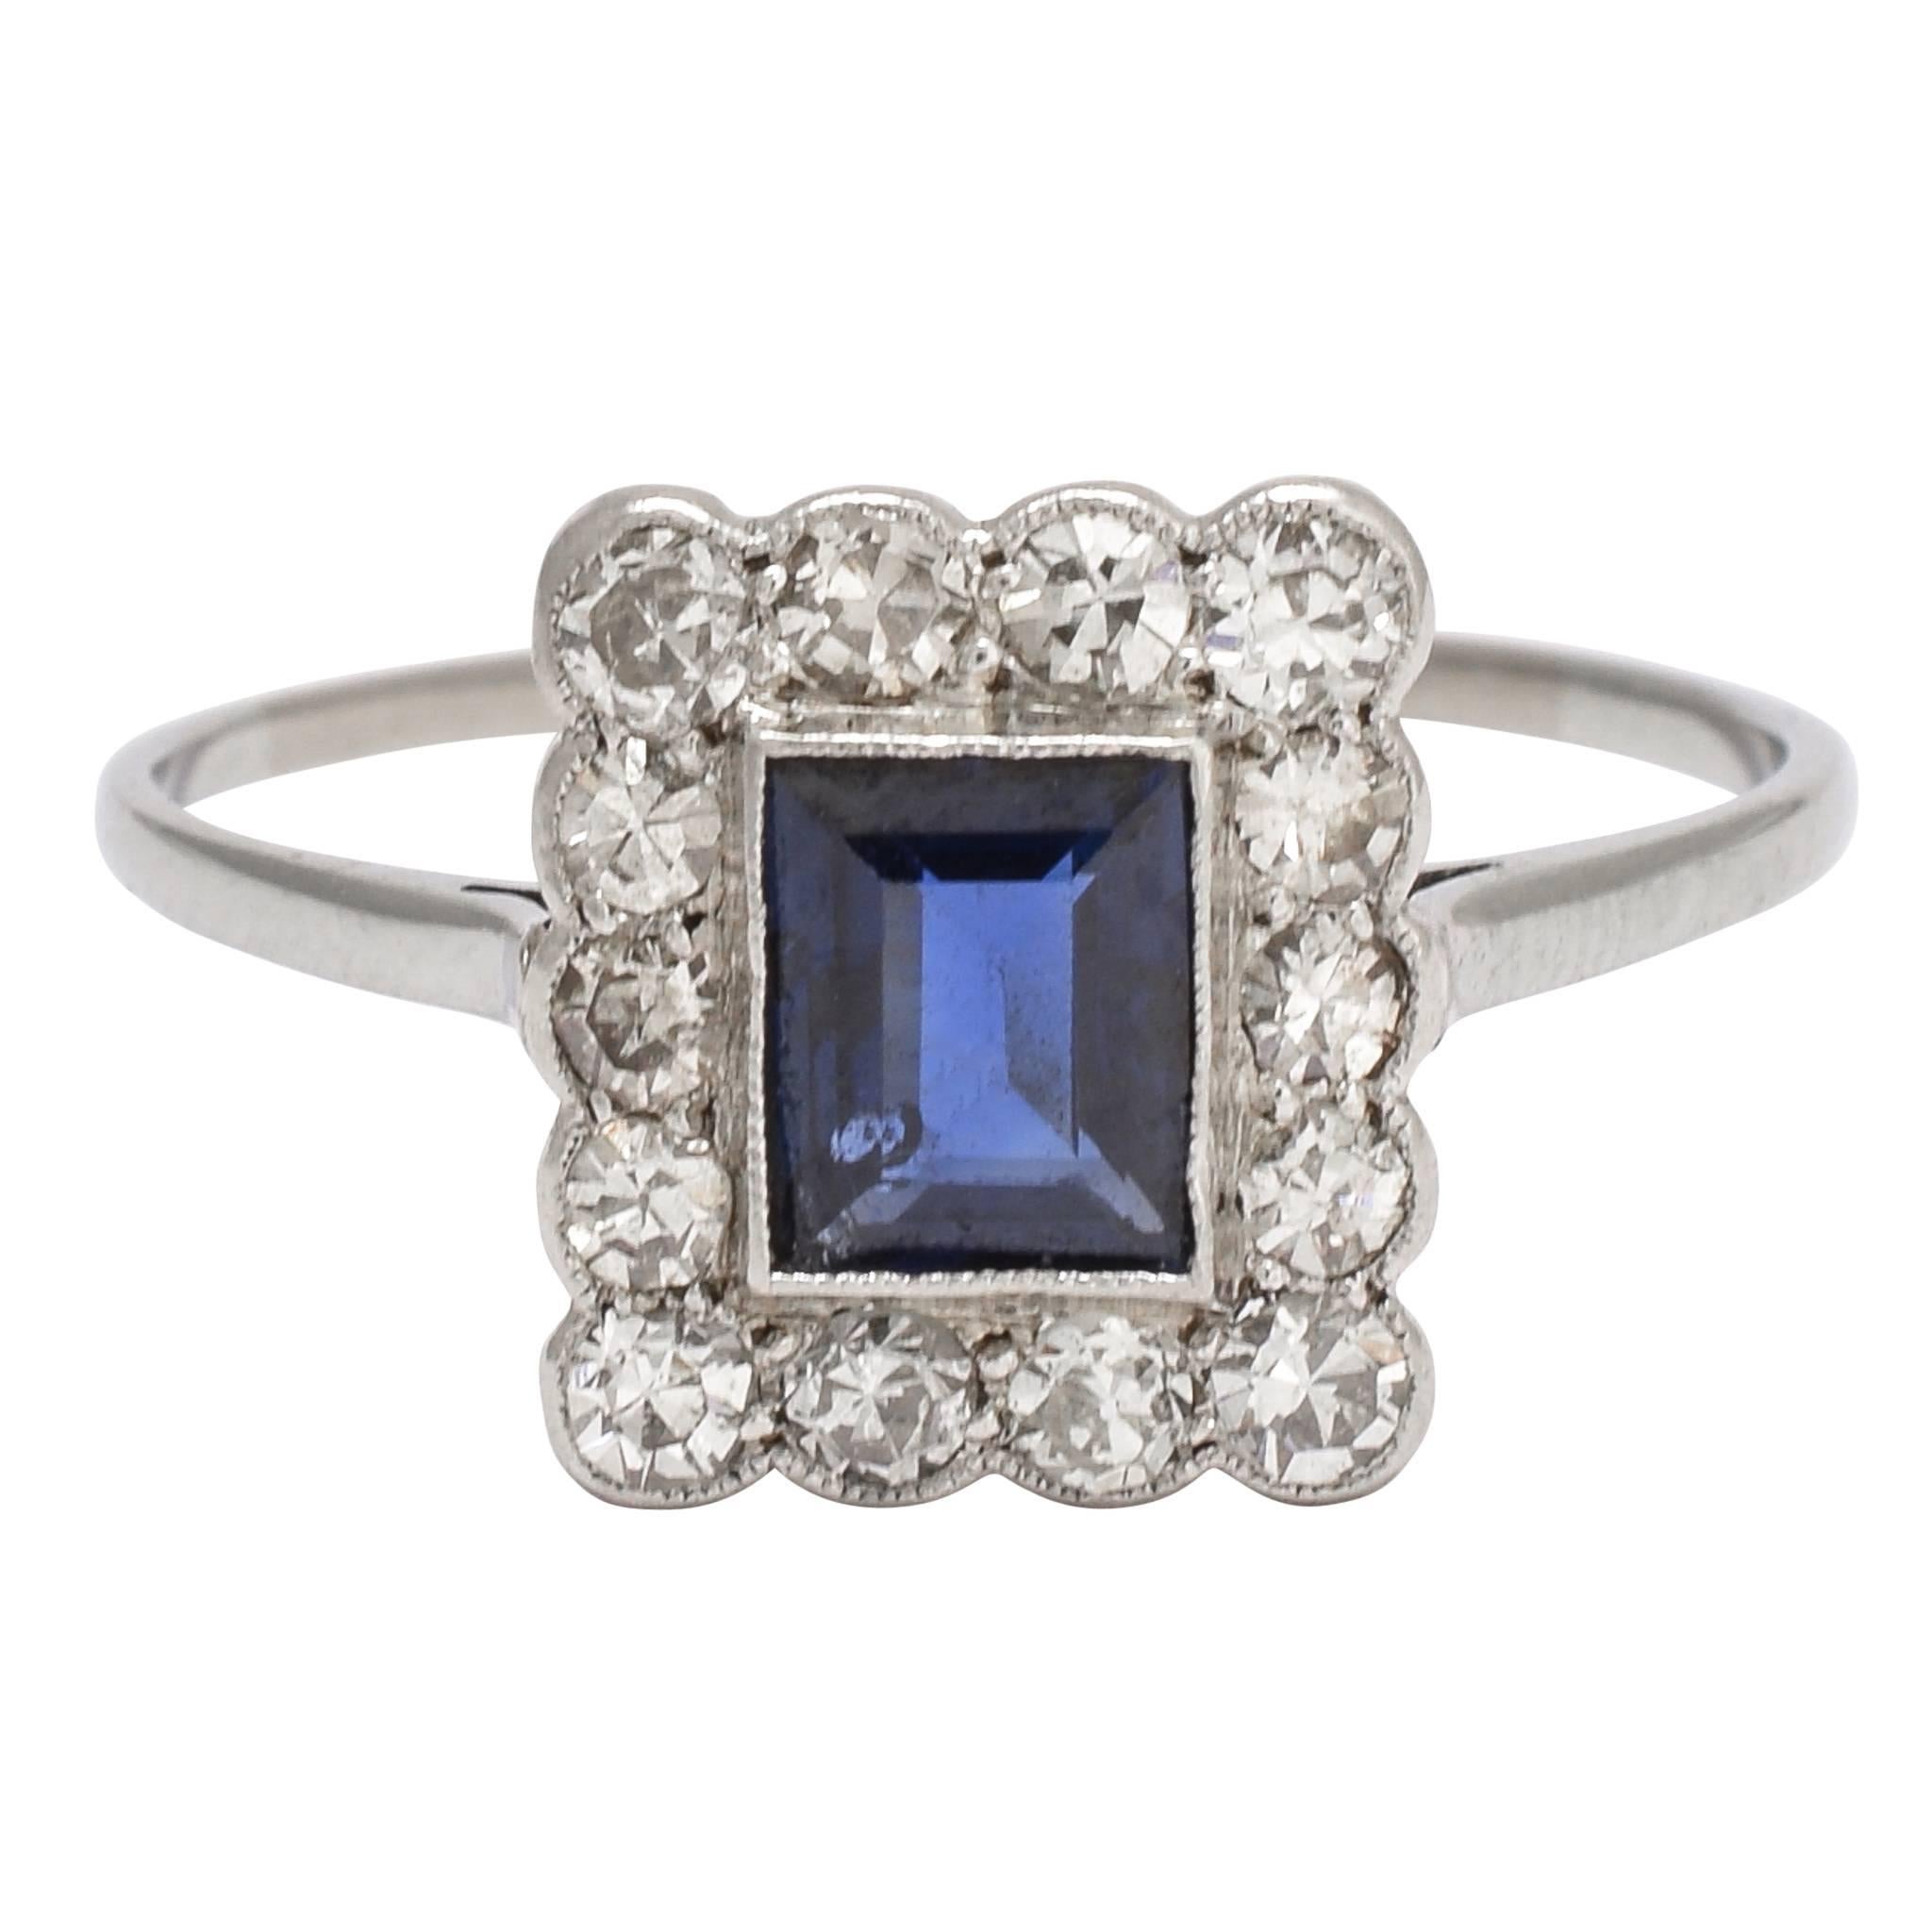 Edwardian Blue Sapphire and Diamond "Picture Frame" Ring